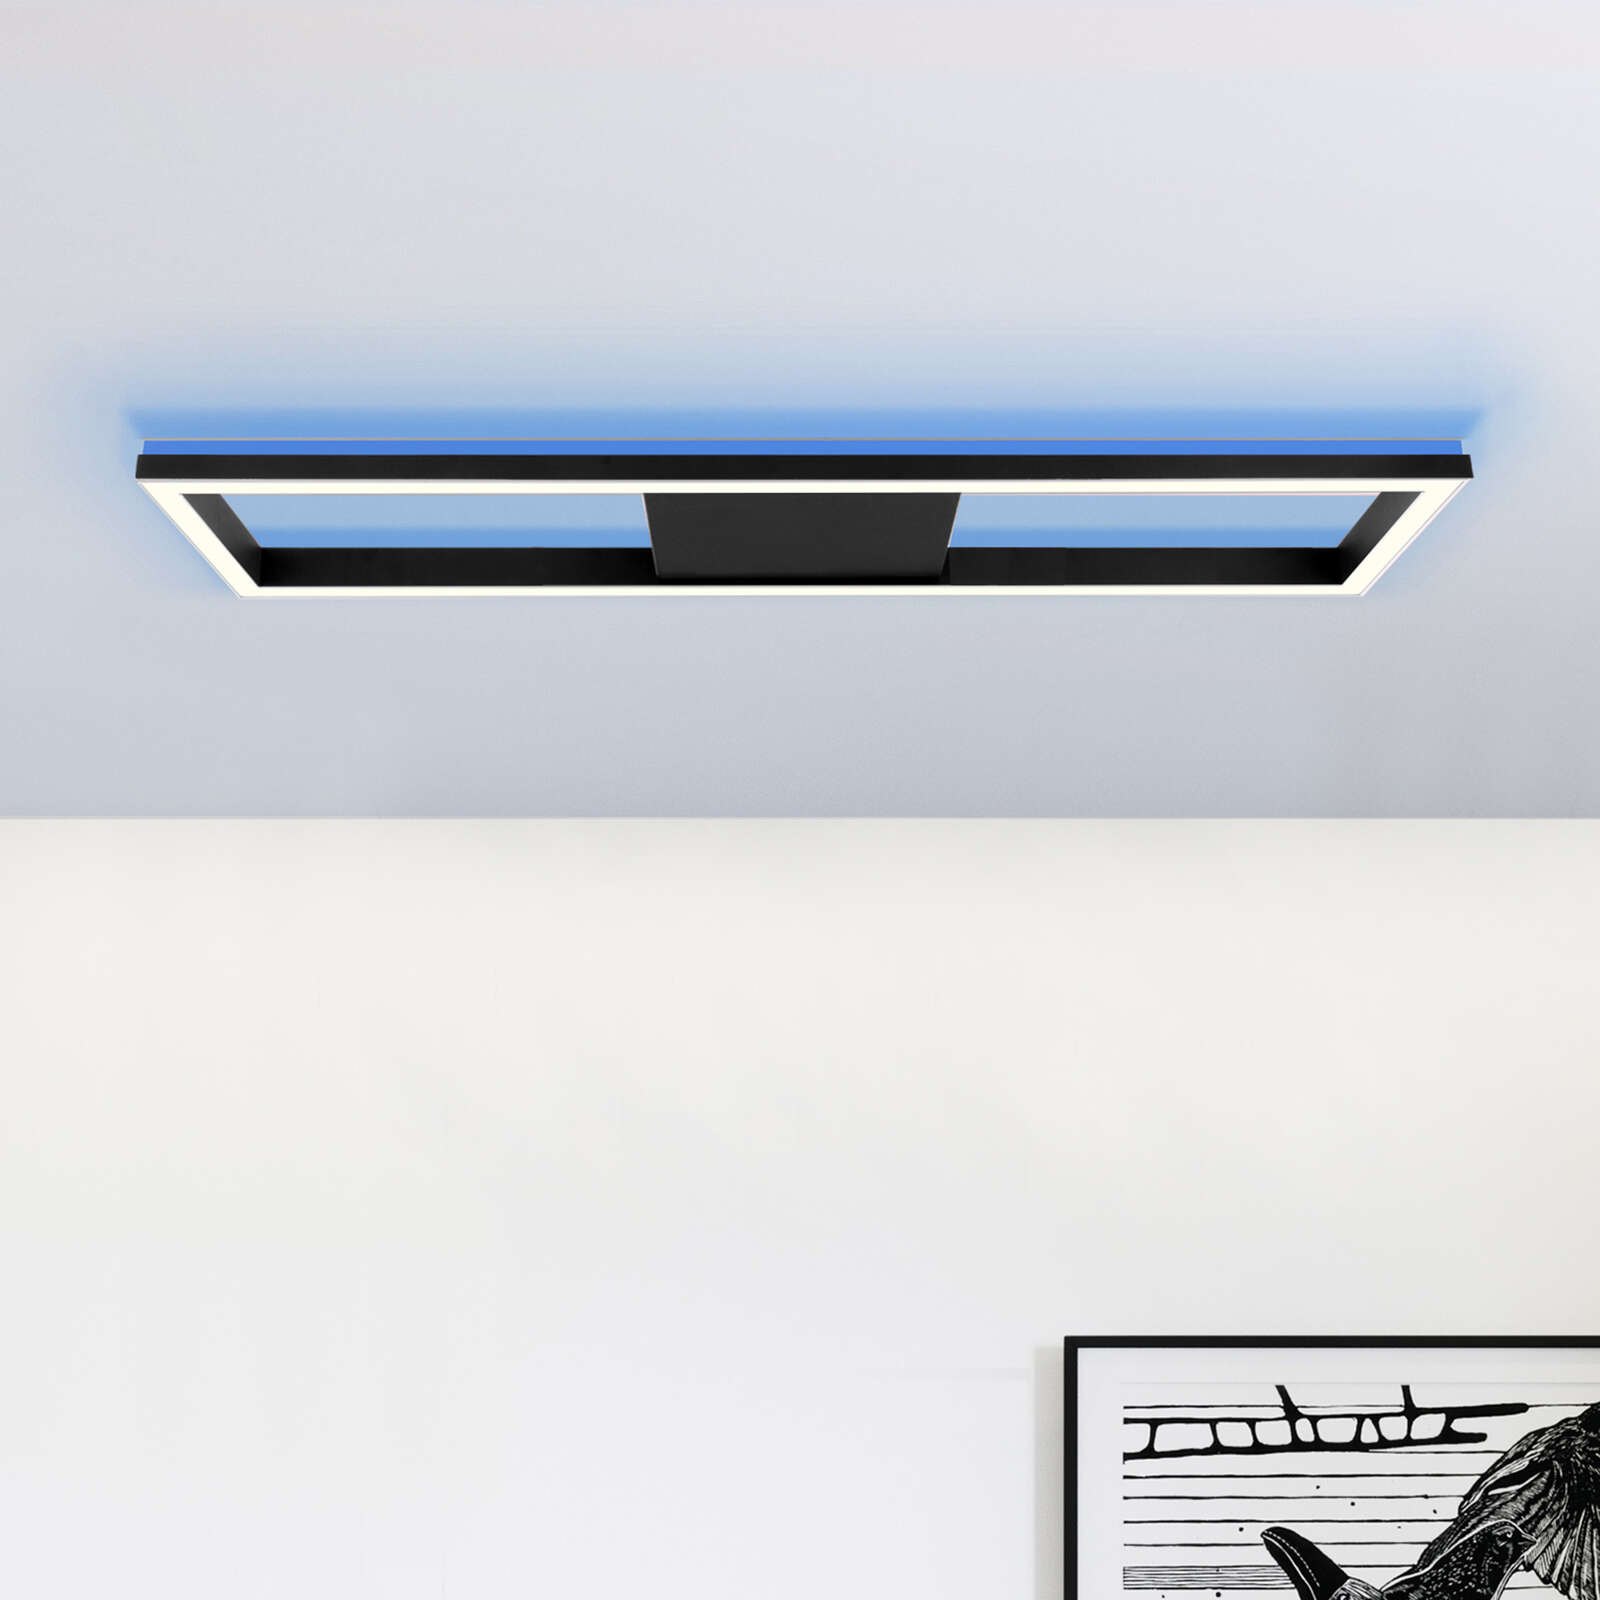             Plastic wall and ceiling light - Janis 6 - Black
        